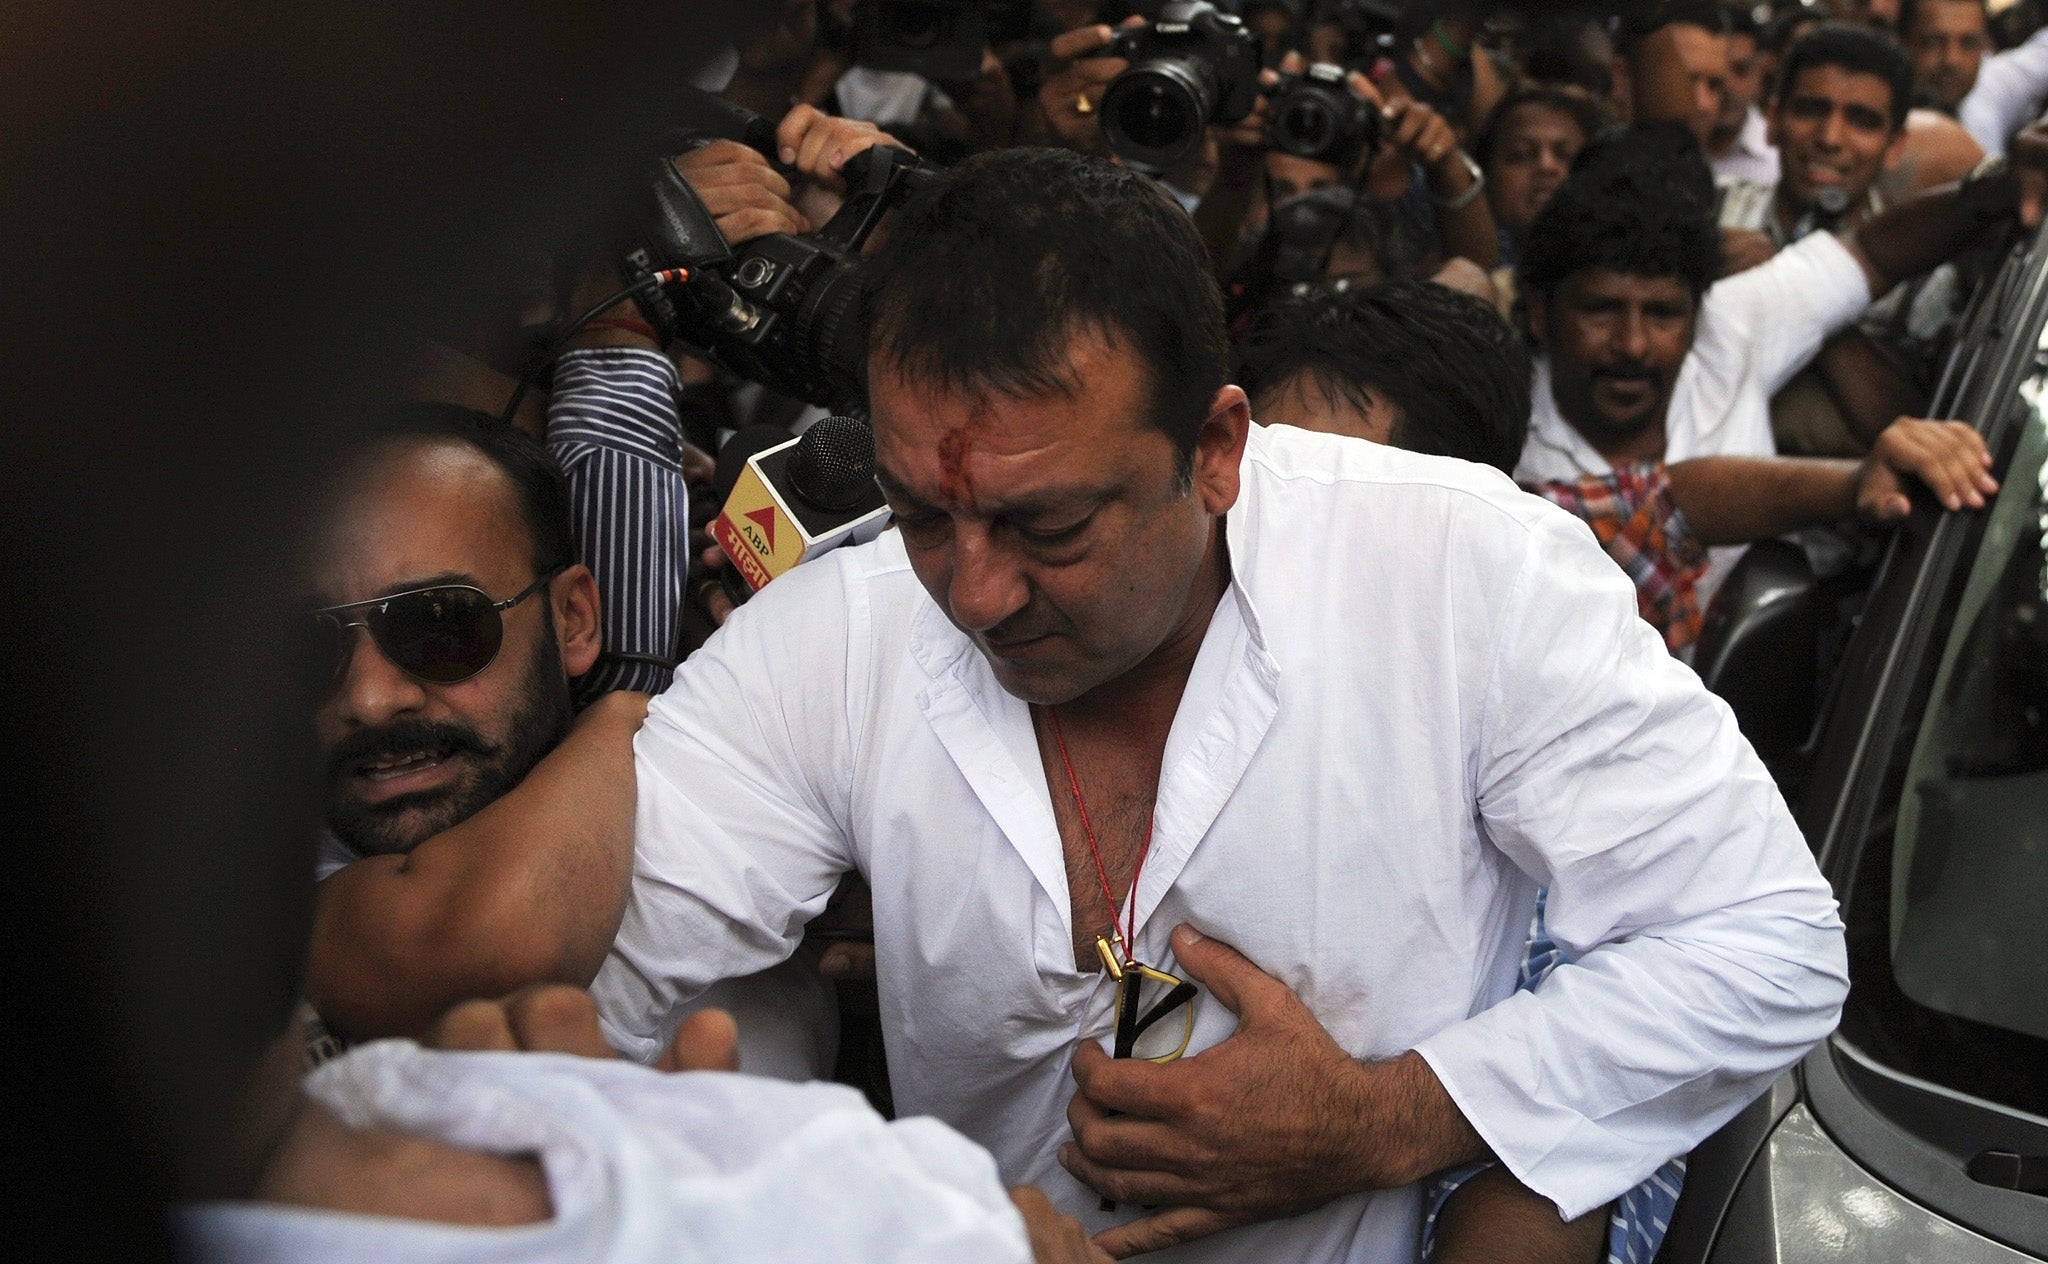 Bad Boy Of Bollywood Sanjay Dutt Confirms He Has Cancer The Independent